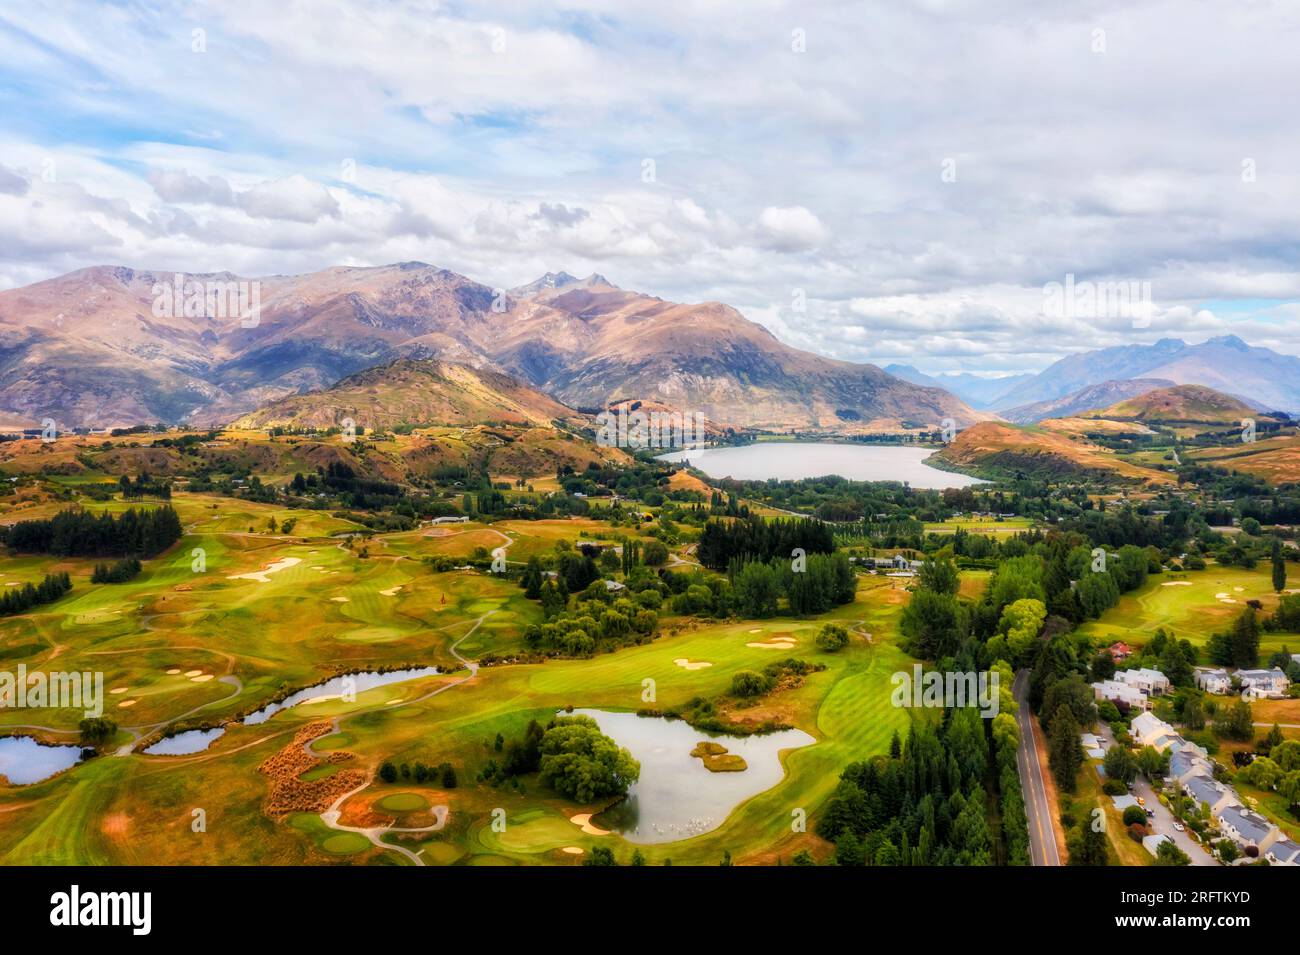 Arrowtown town in New Zealand near Queenstown in scenic mountain region with valleys and lake Hayes. Stock Photo